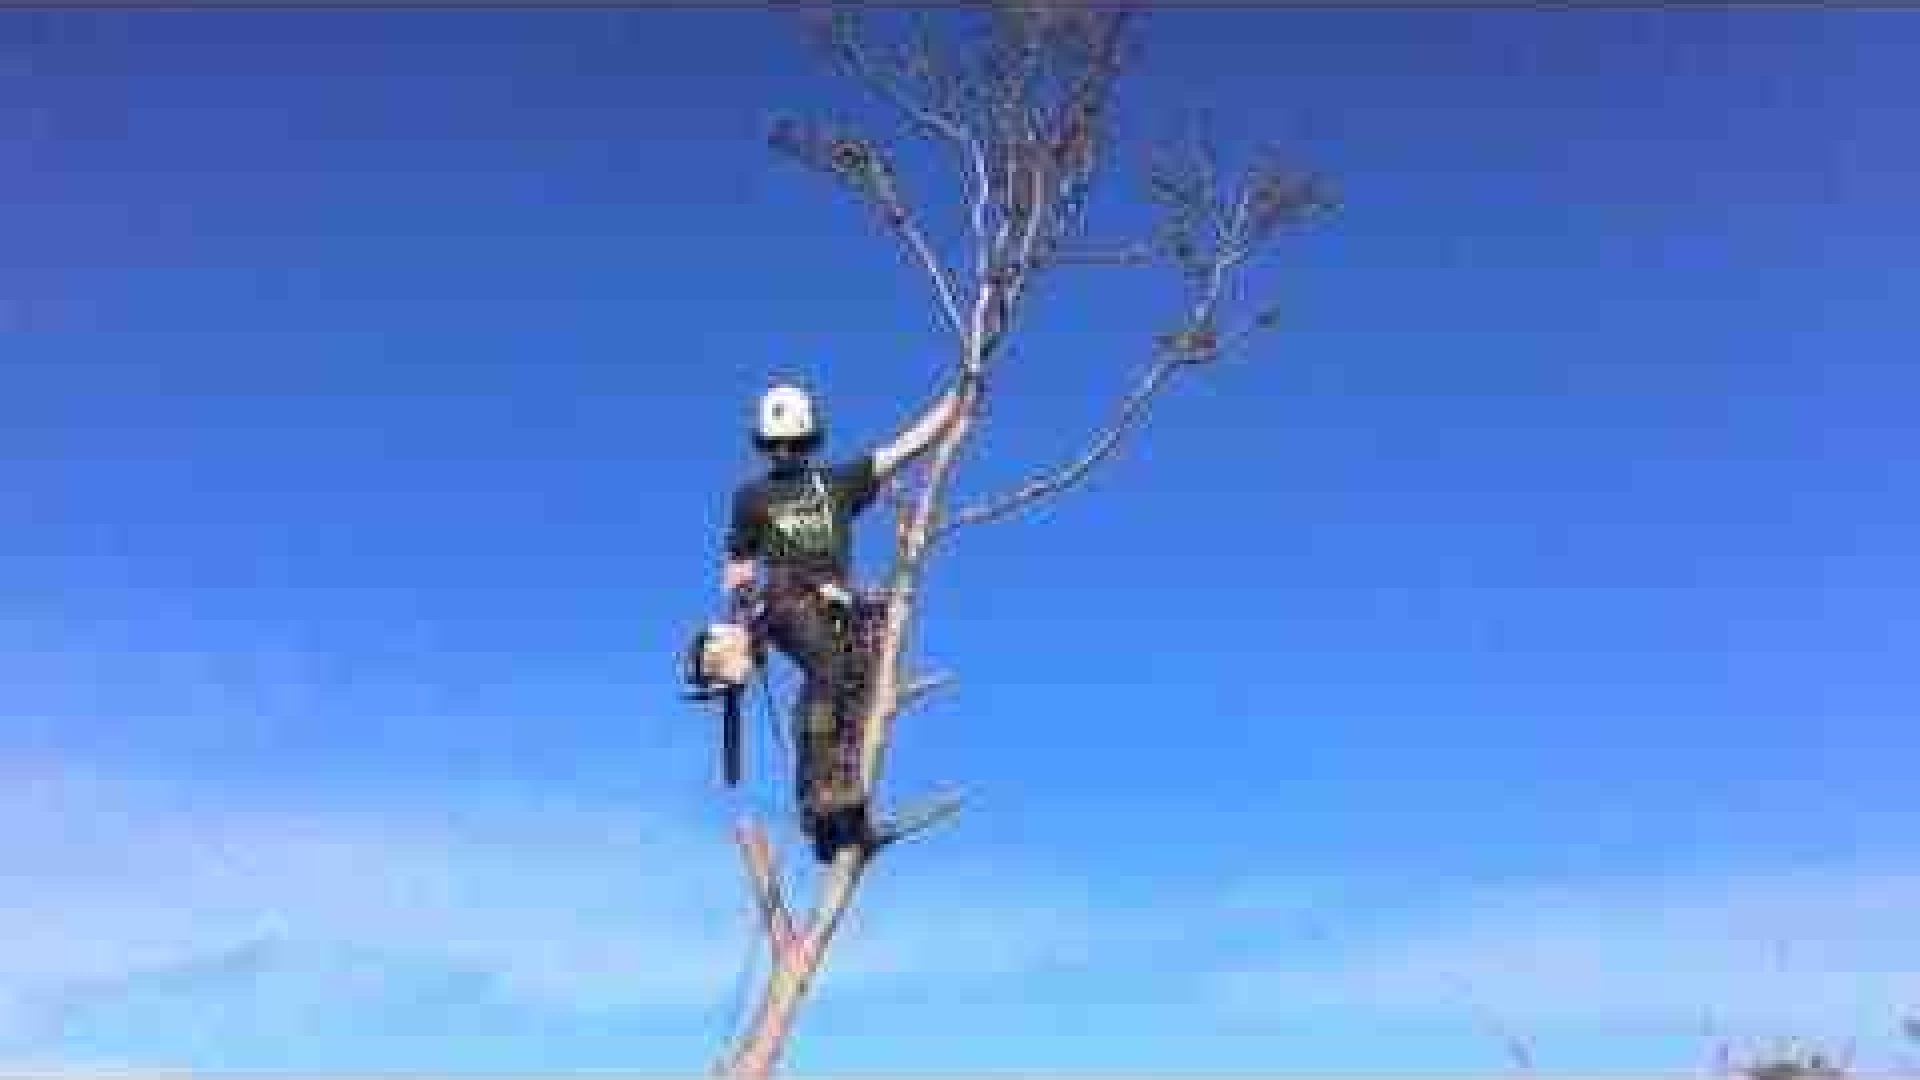 Seaford's Tree Removal Experts - Cut It Right Tree Services